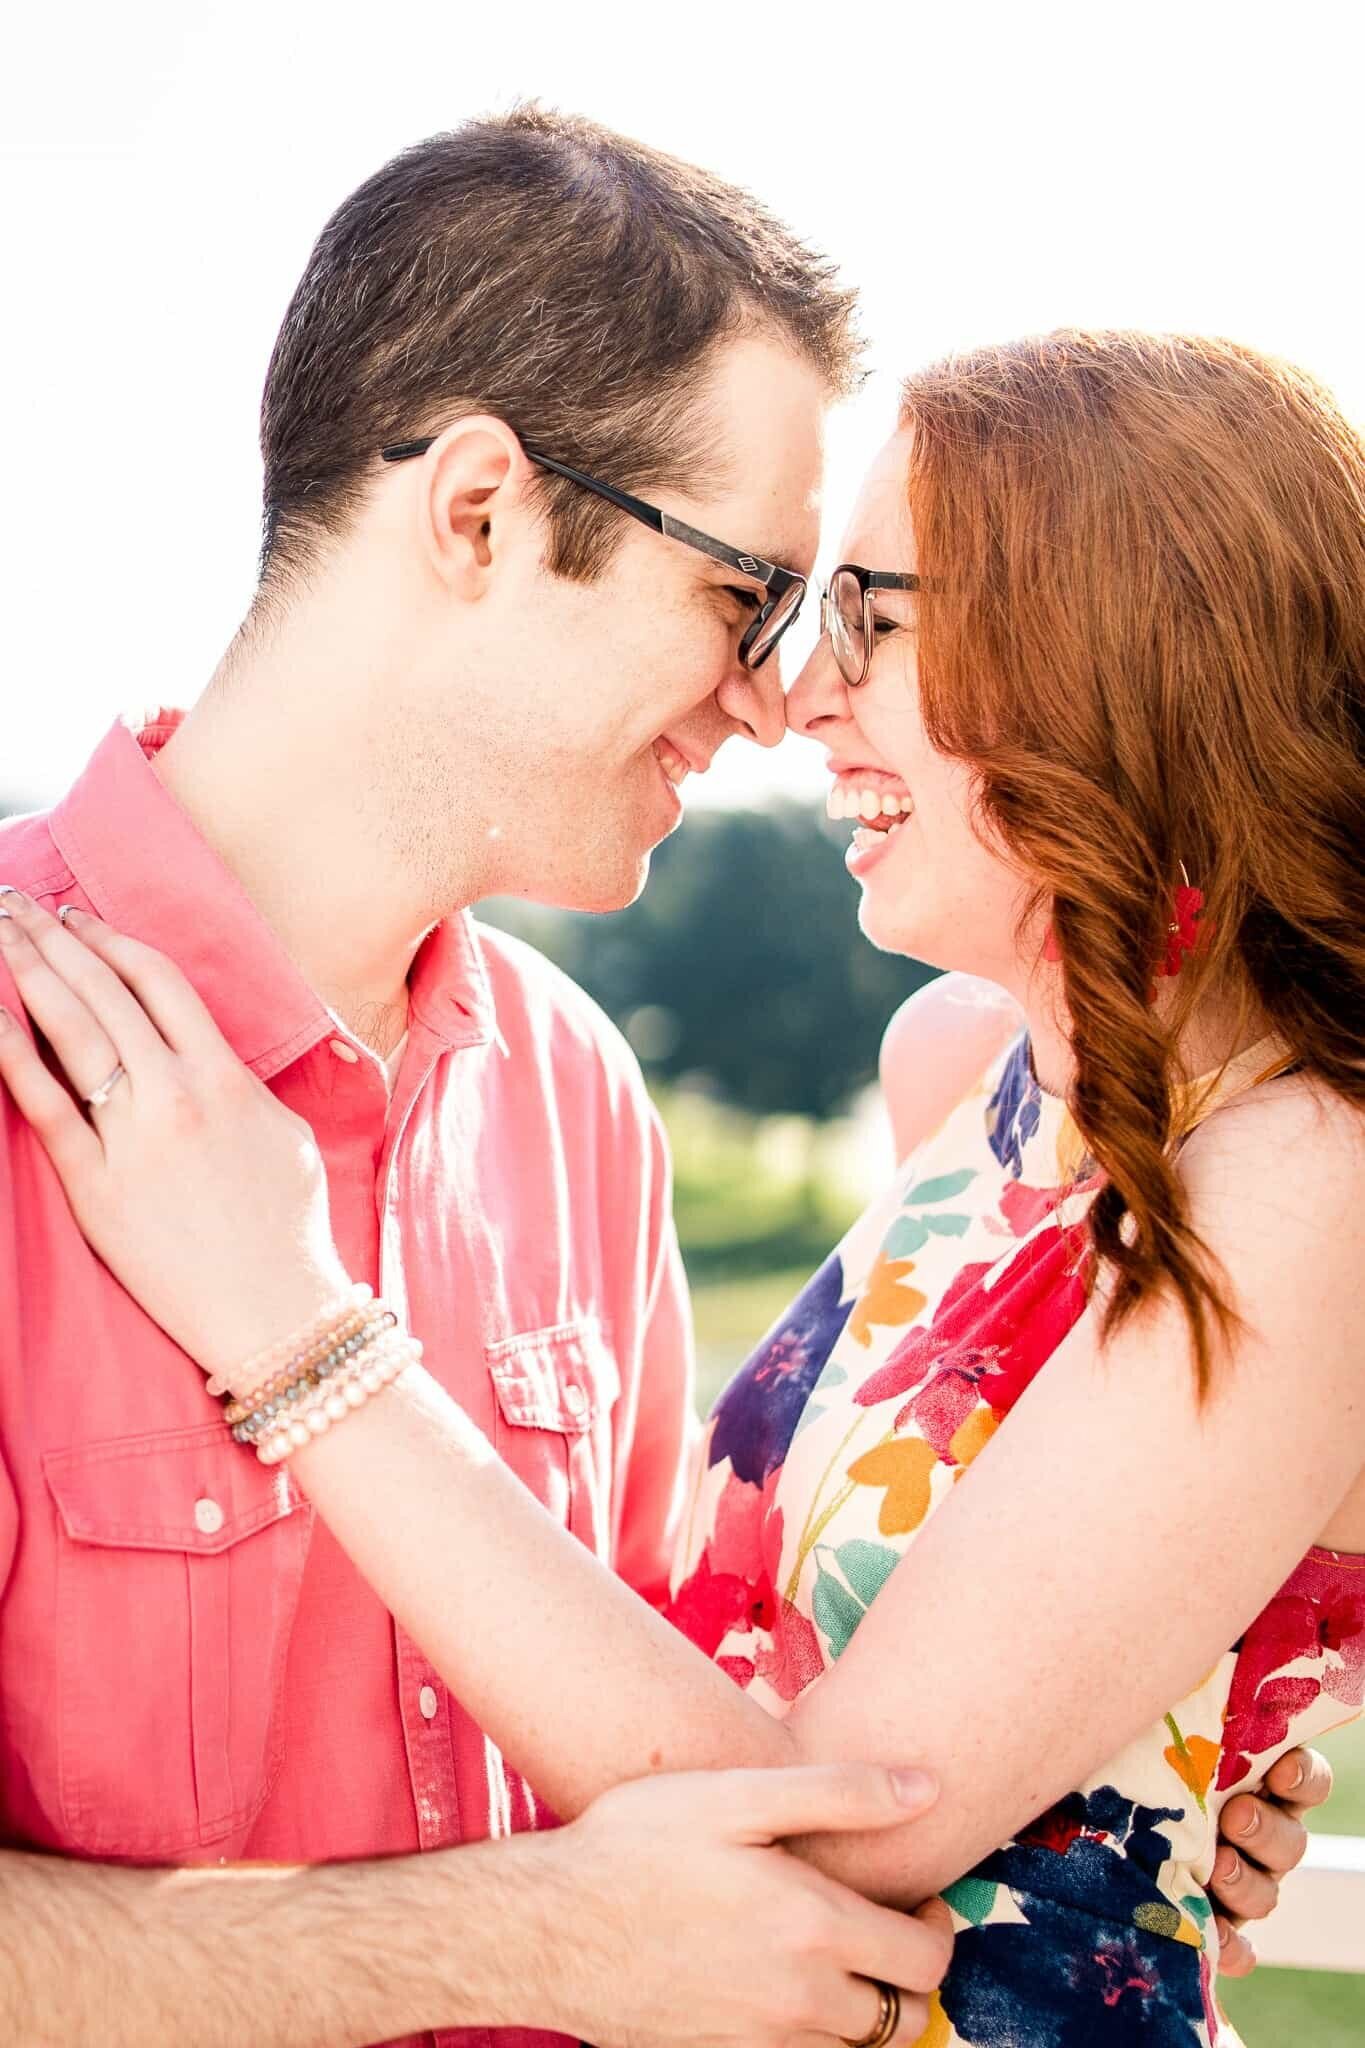 An engaged couple laughing together wearing colorful clothing during their engagement session in Northern Virginia